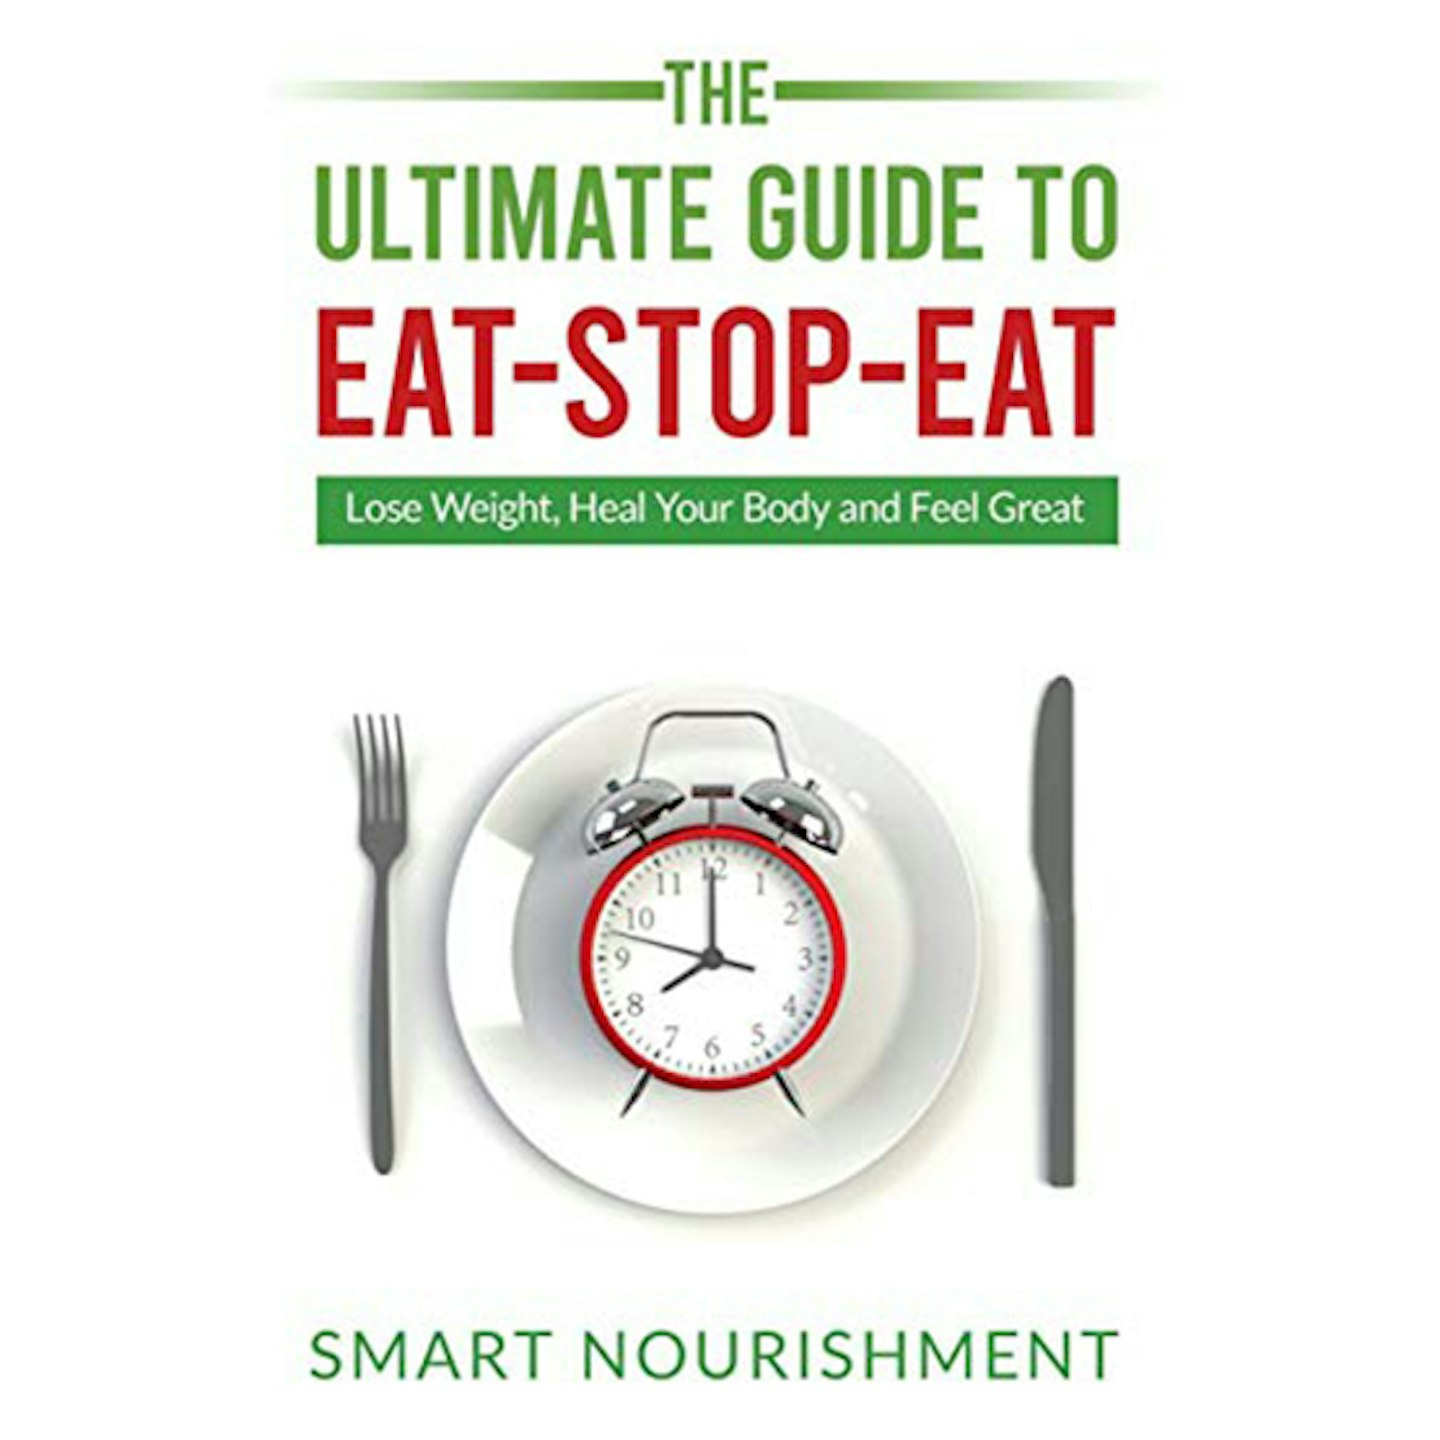 The Ultimate Guide To Eat-Stop-Eat: Lose Weight, Heal Your Body and Feel Great